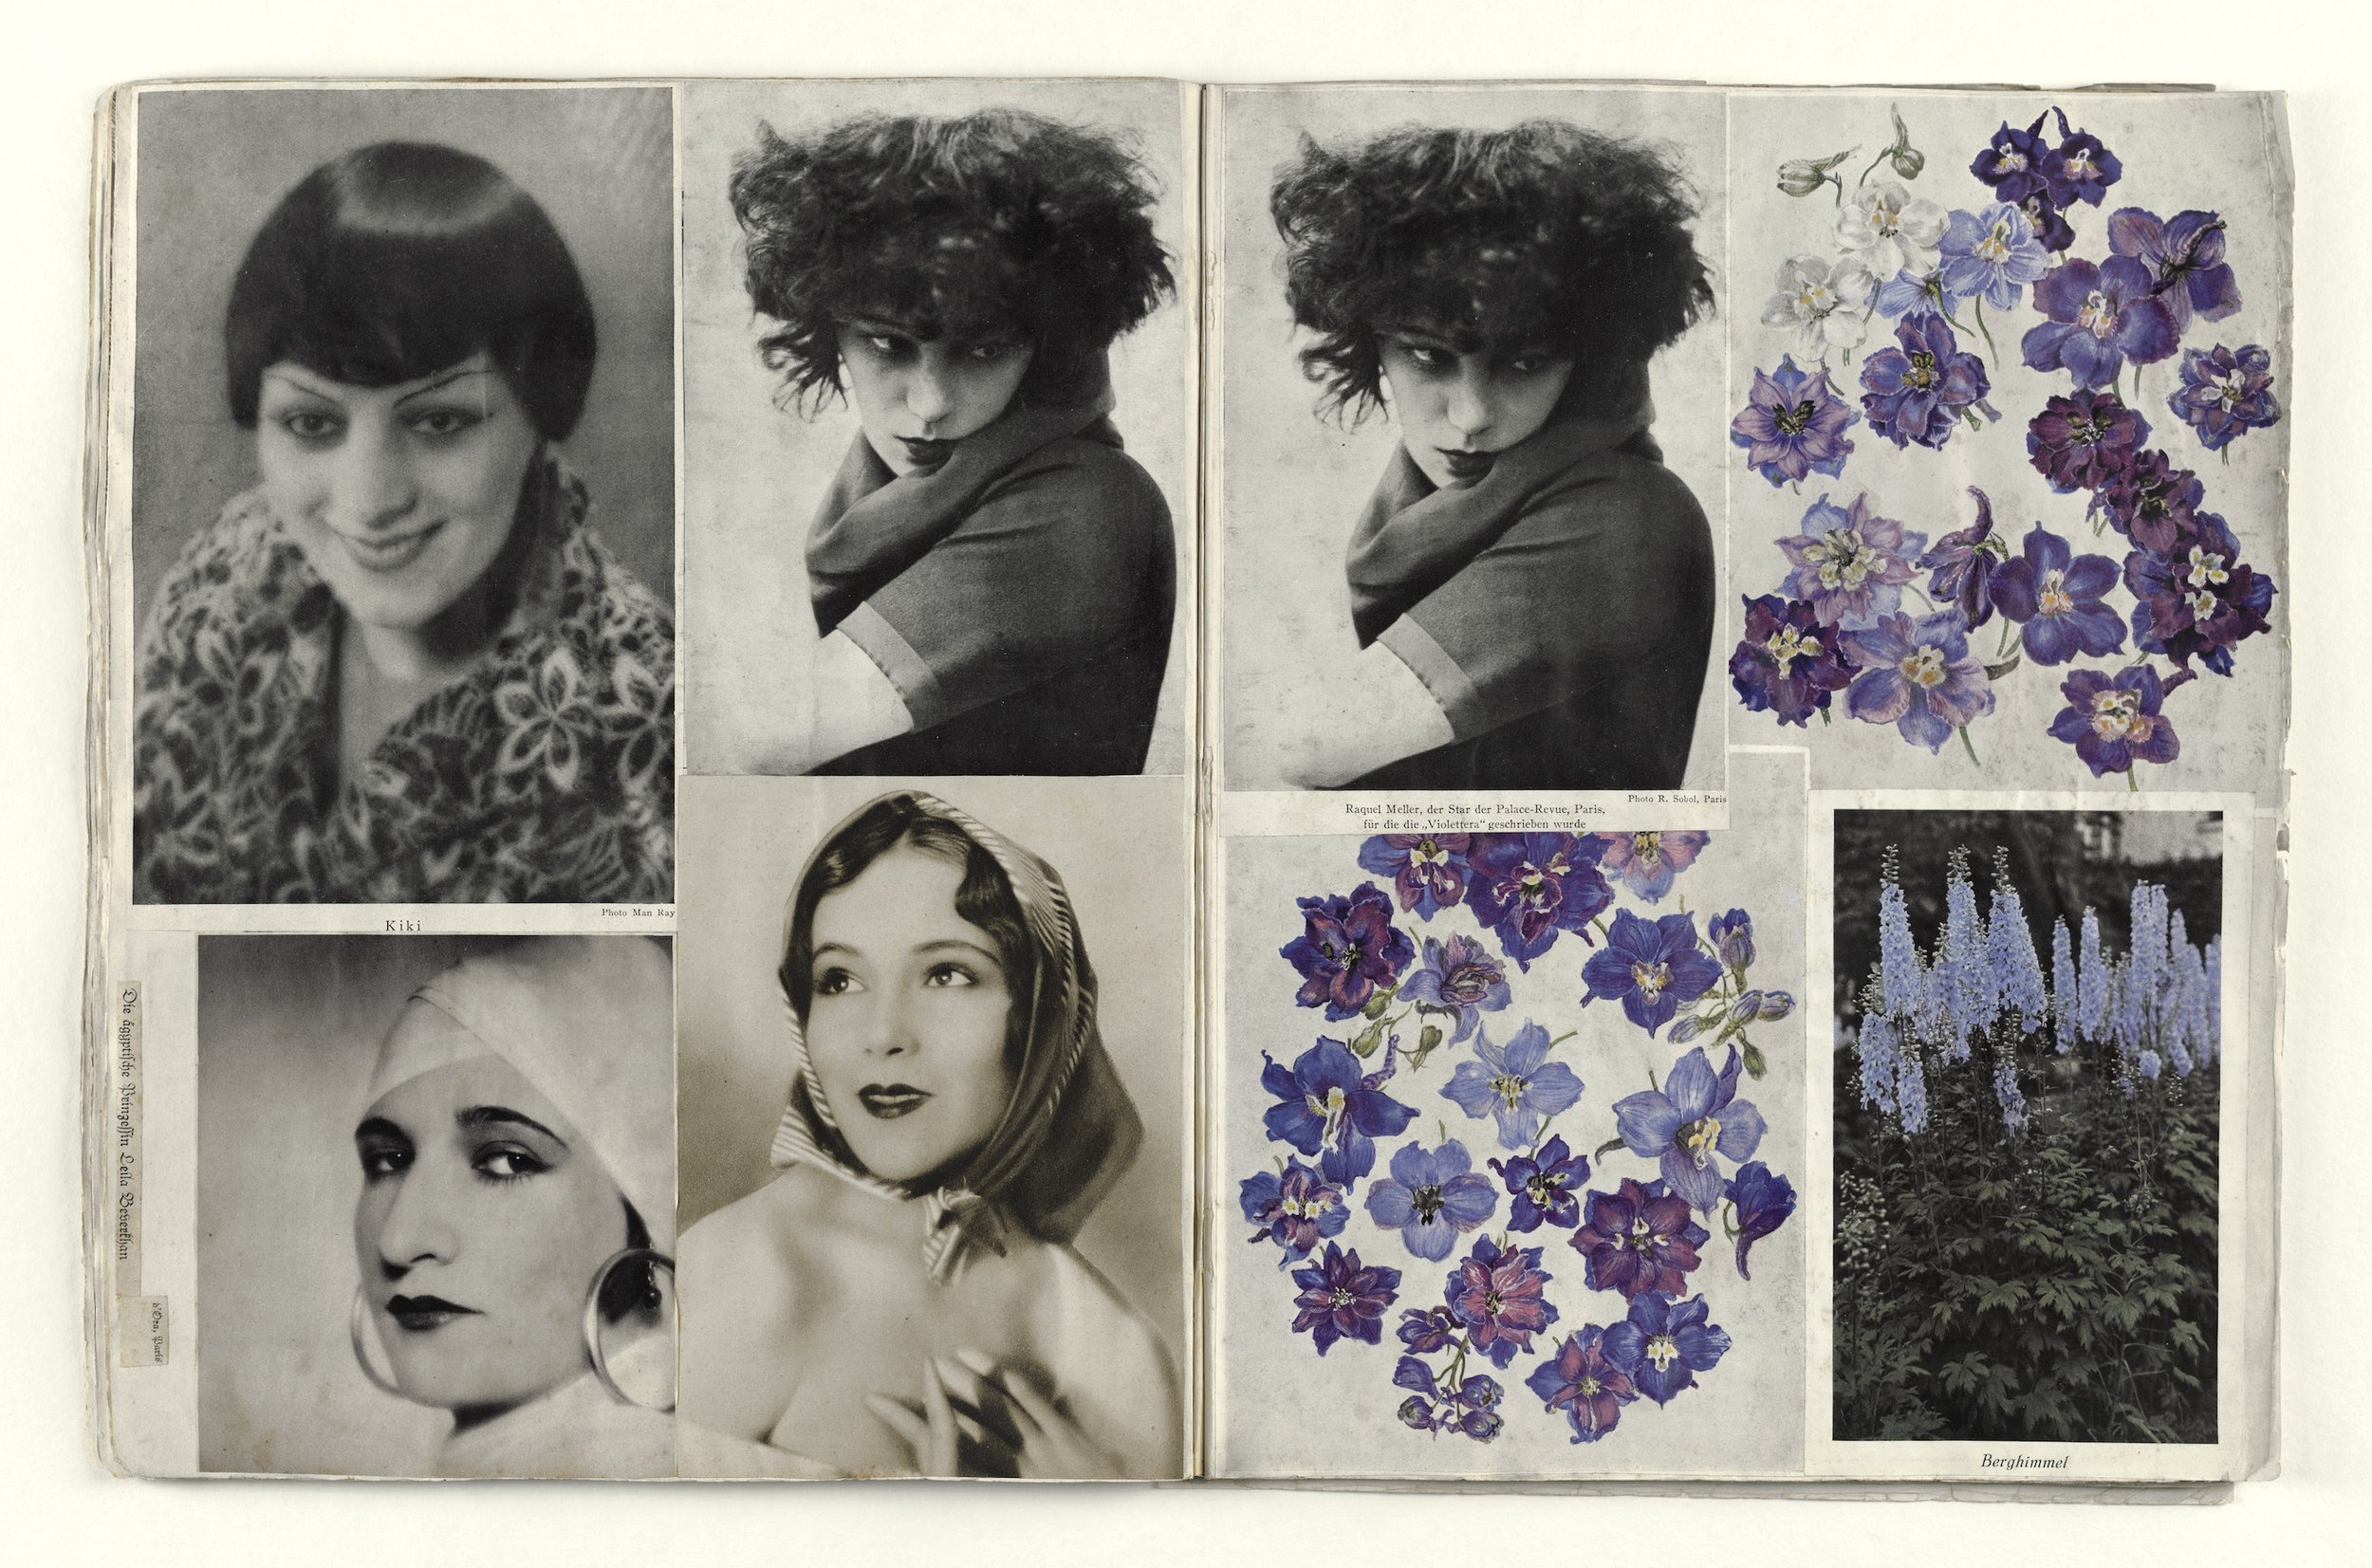 Hannah Höch, Album (Scrapbook), 1933 Collage, Courtesy Berlinische Galerie, purchased with funds from Stiftung DKLB, Berlin 1979. © 2021 Artists Rights Society (ARS), New York / VG Bild-Kunst, Bonn